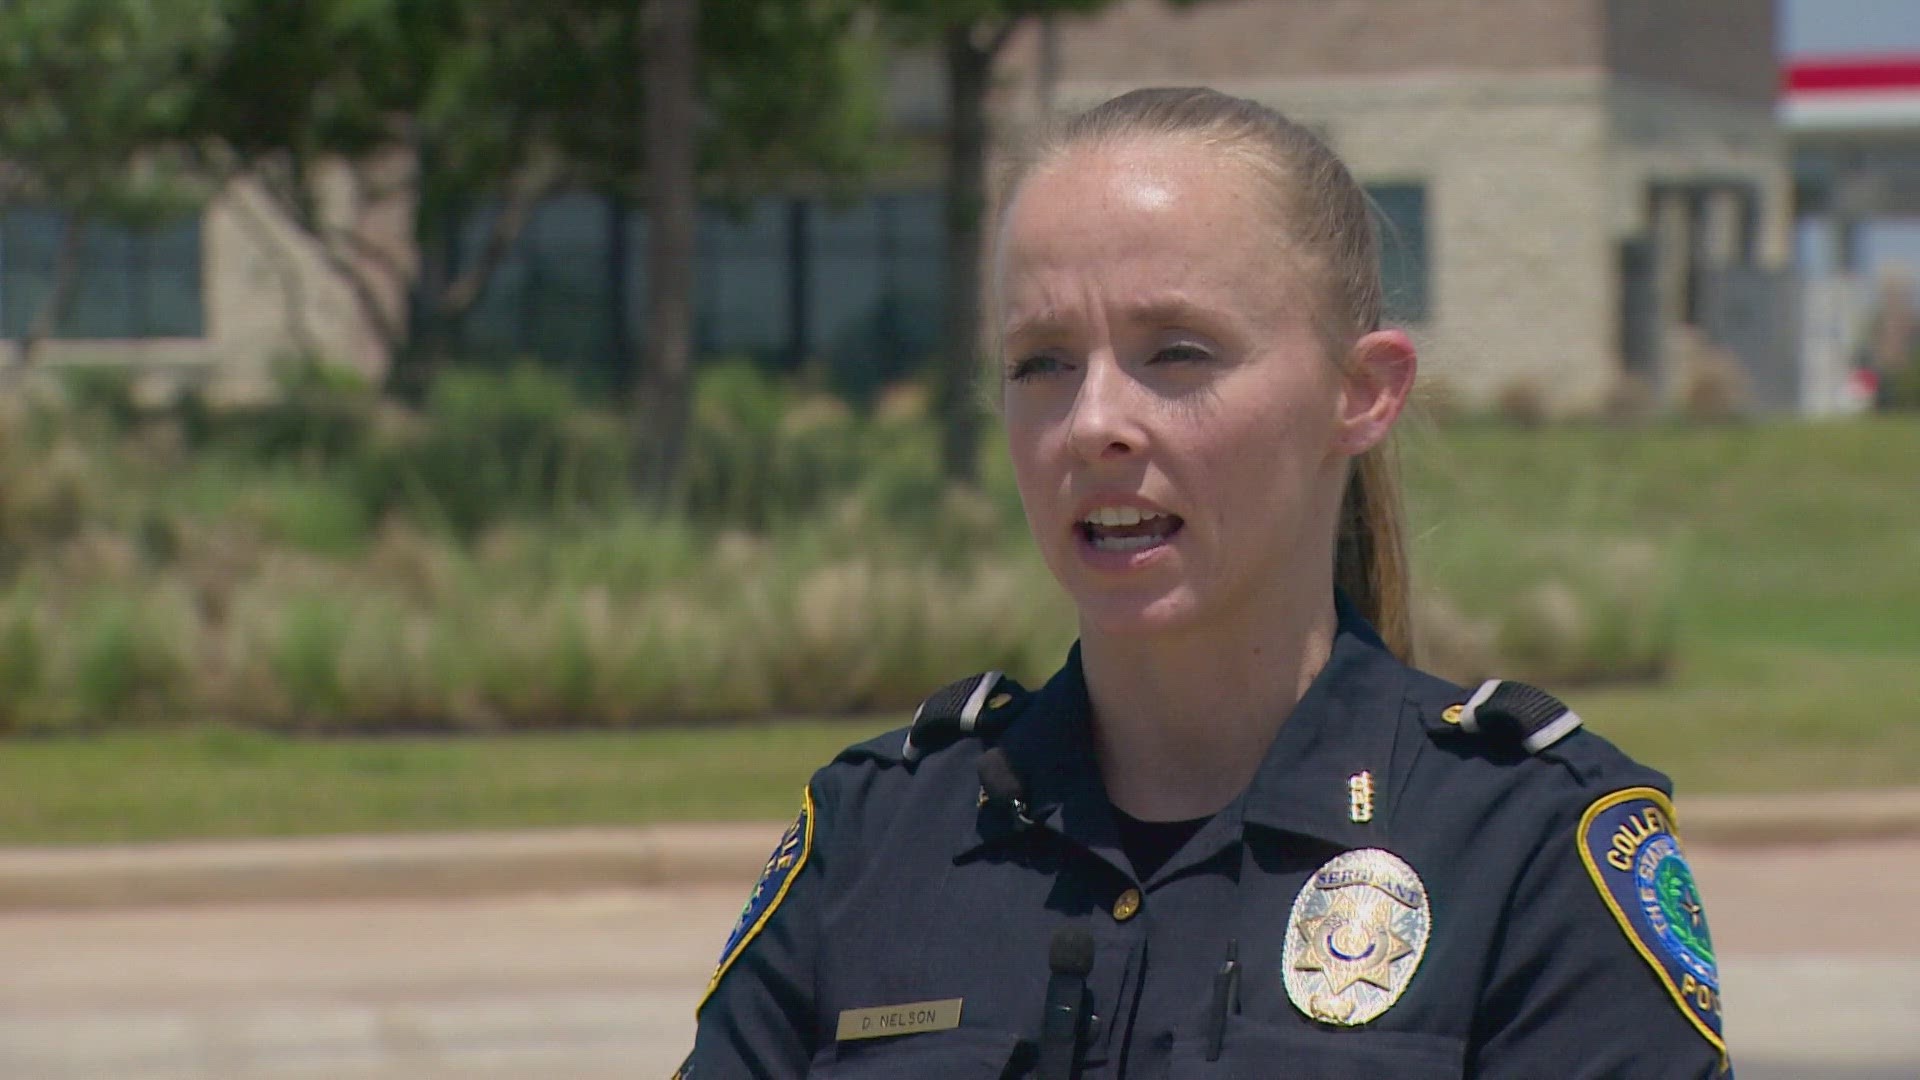 "They're typically targeting the elderly or somebody who would be in a frantic situation," said Sgt. Dara Nelson.